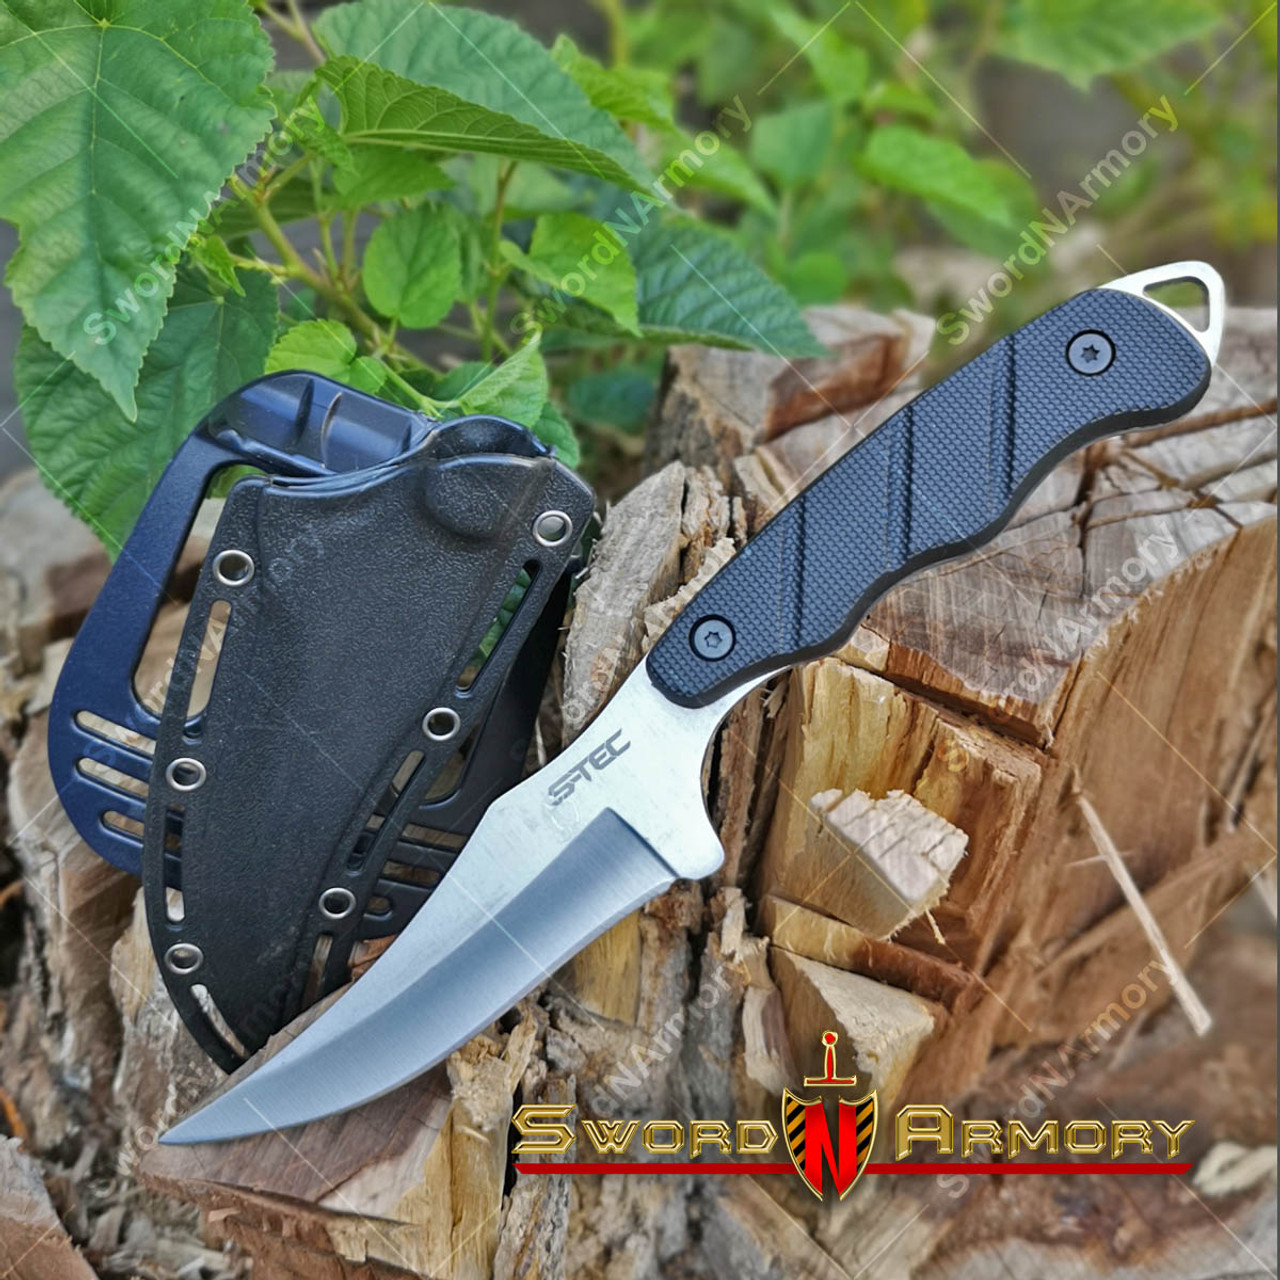 9 Fixed Blade Tactical Hunting Knife with ABS Belt Loop Holster